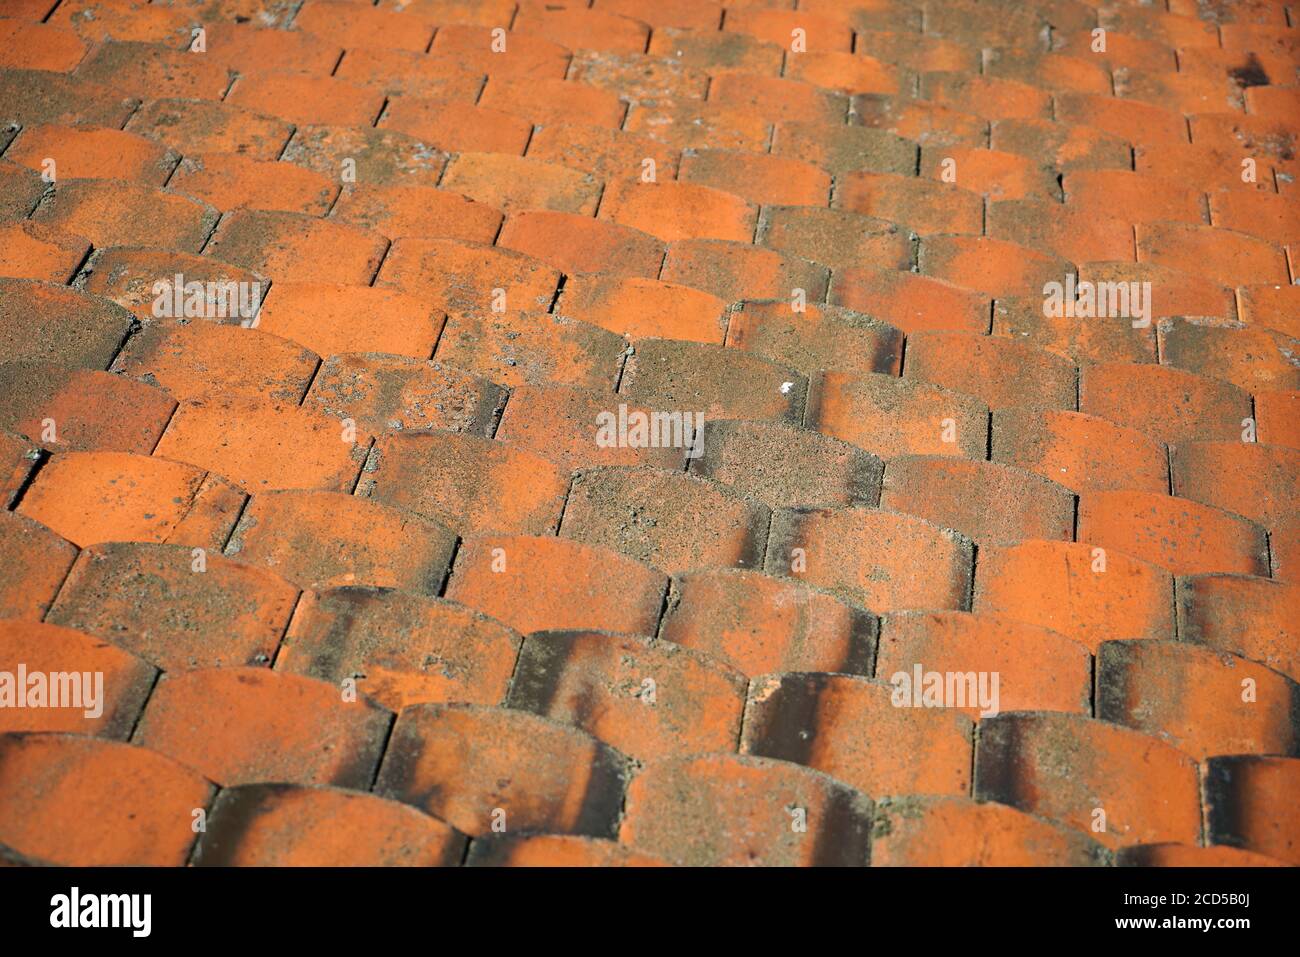 Closeup of roof tiles made of baked clay Stock Photo